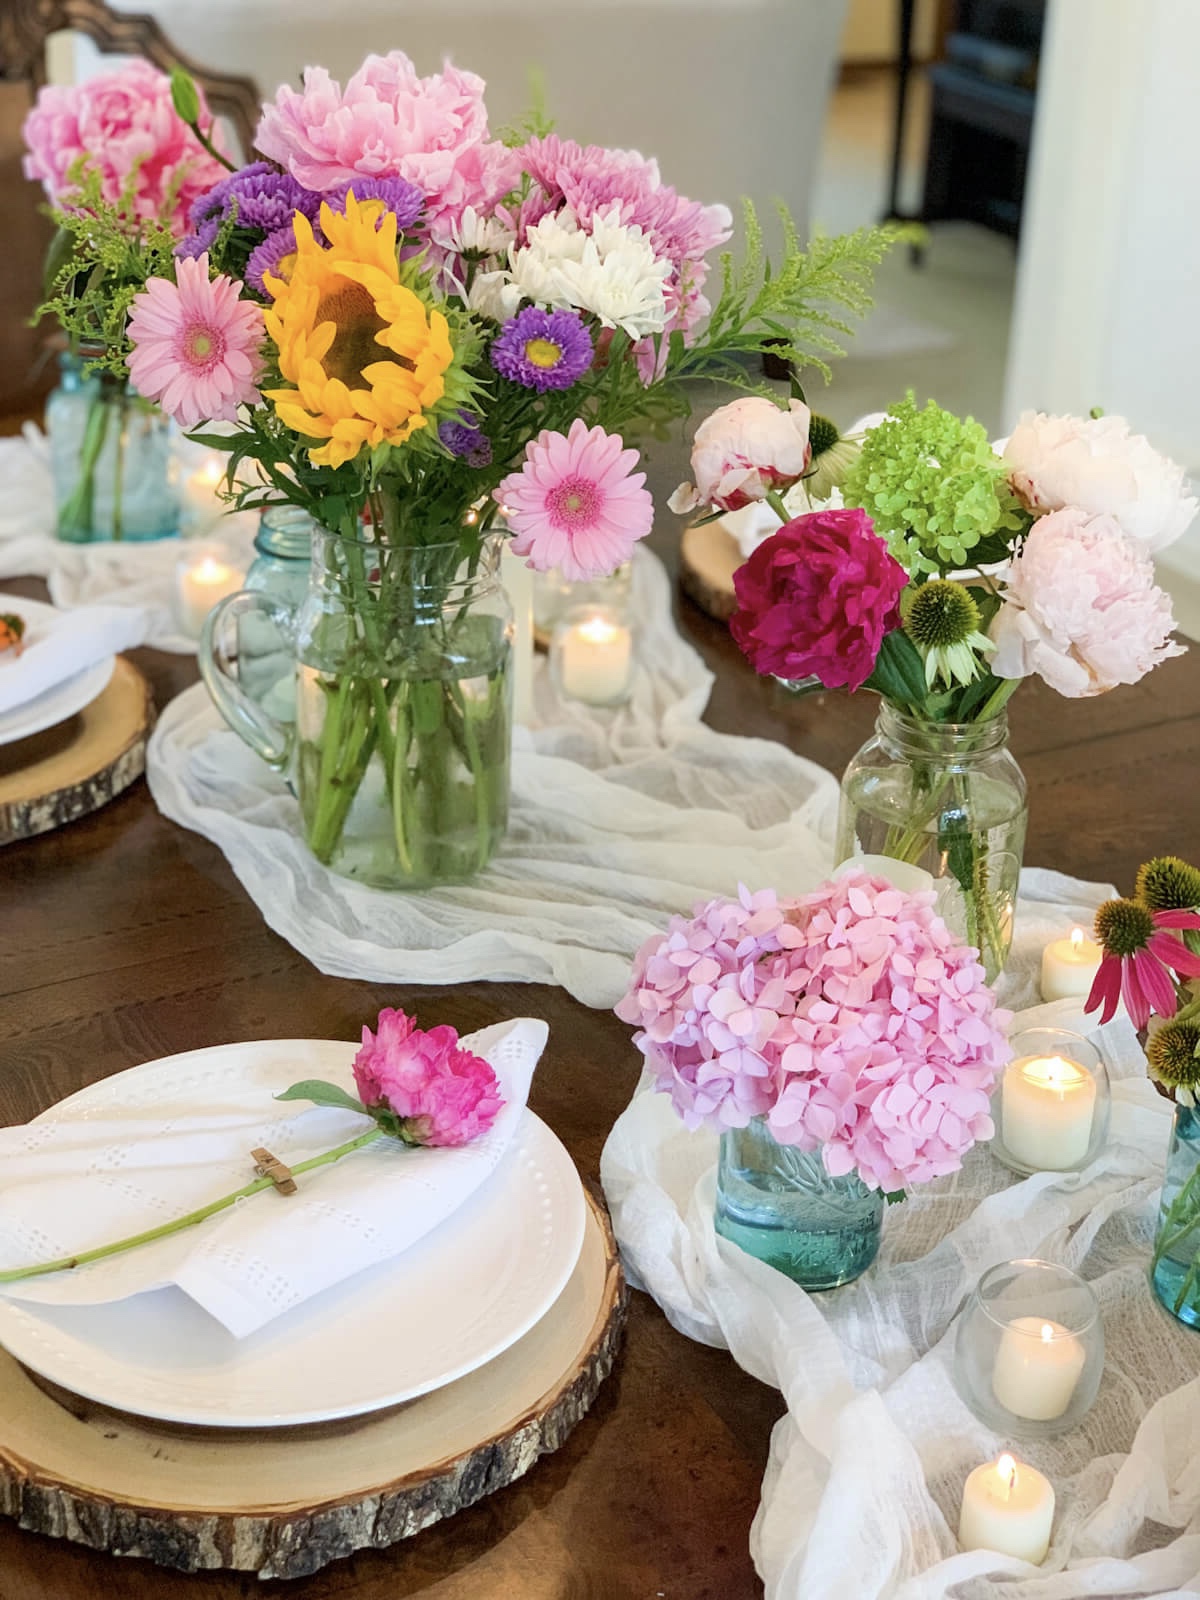 A place setting with a wood charger sits beside a summery country centerpiece.